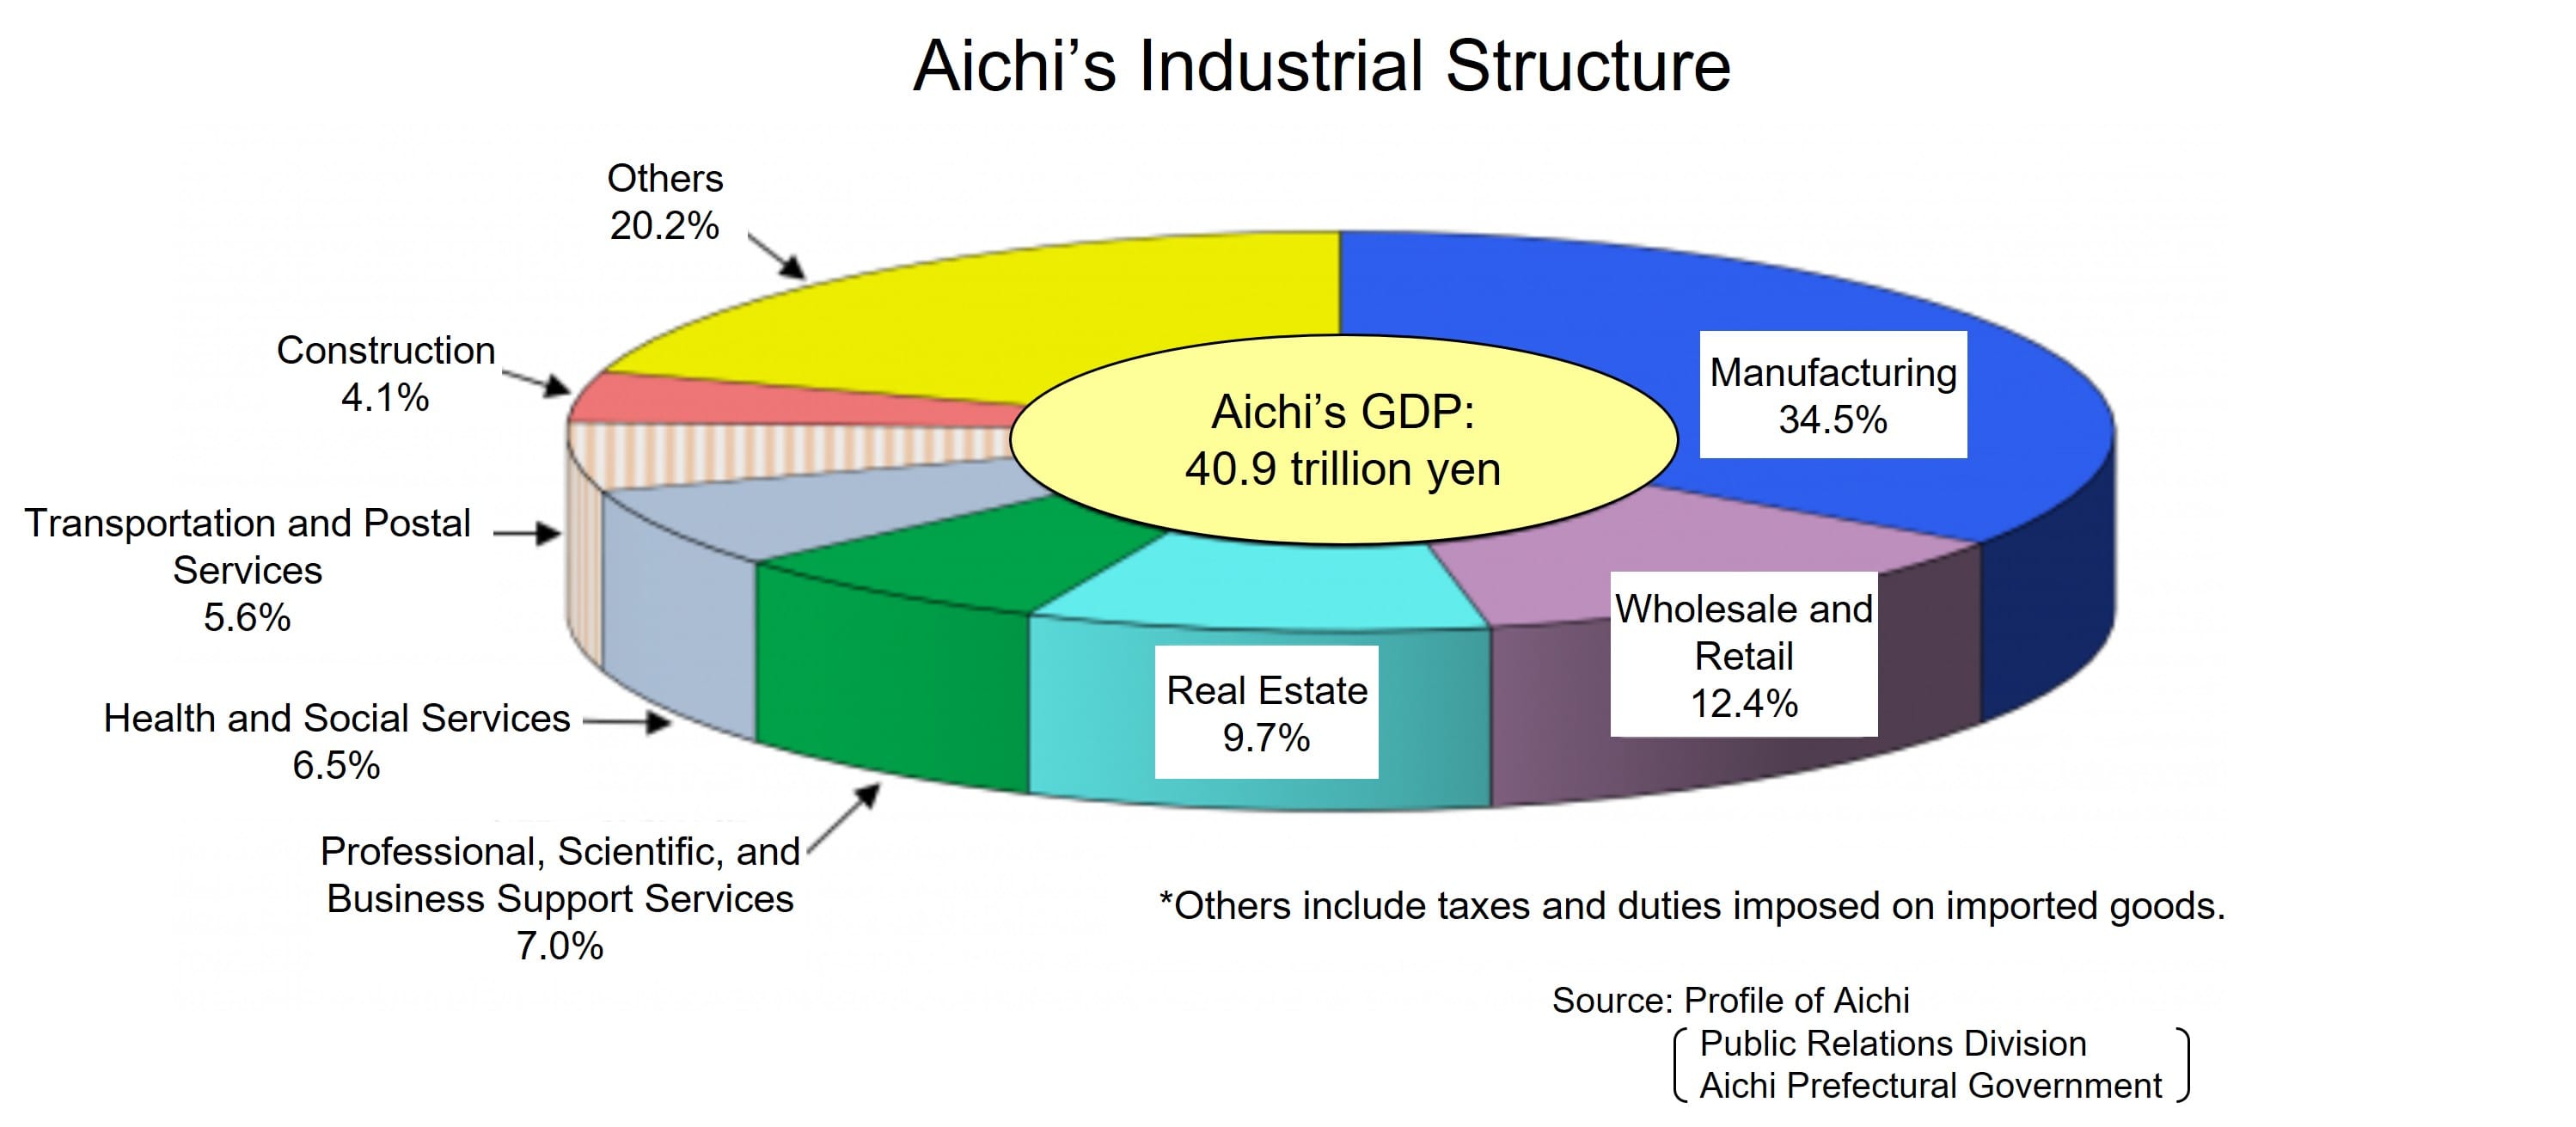 Aichi's Industrial Structure